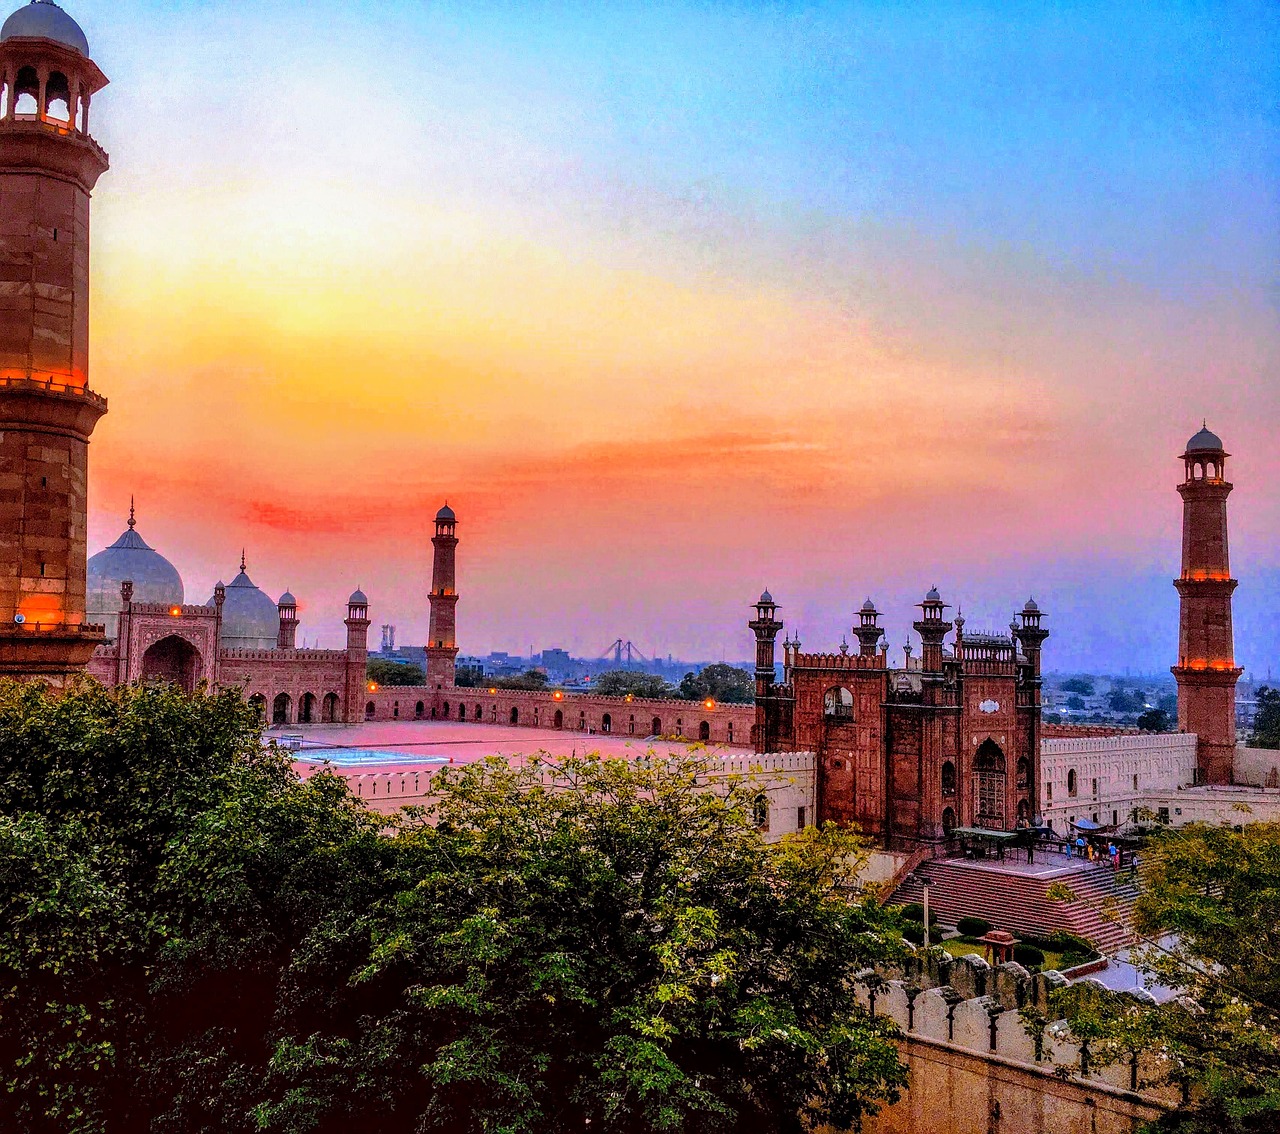 4-Day Cultural Exploration of Lahore